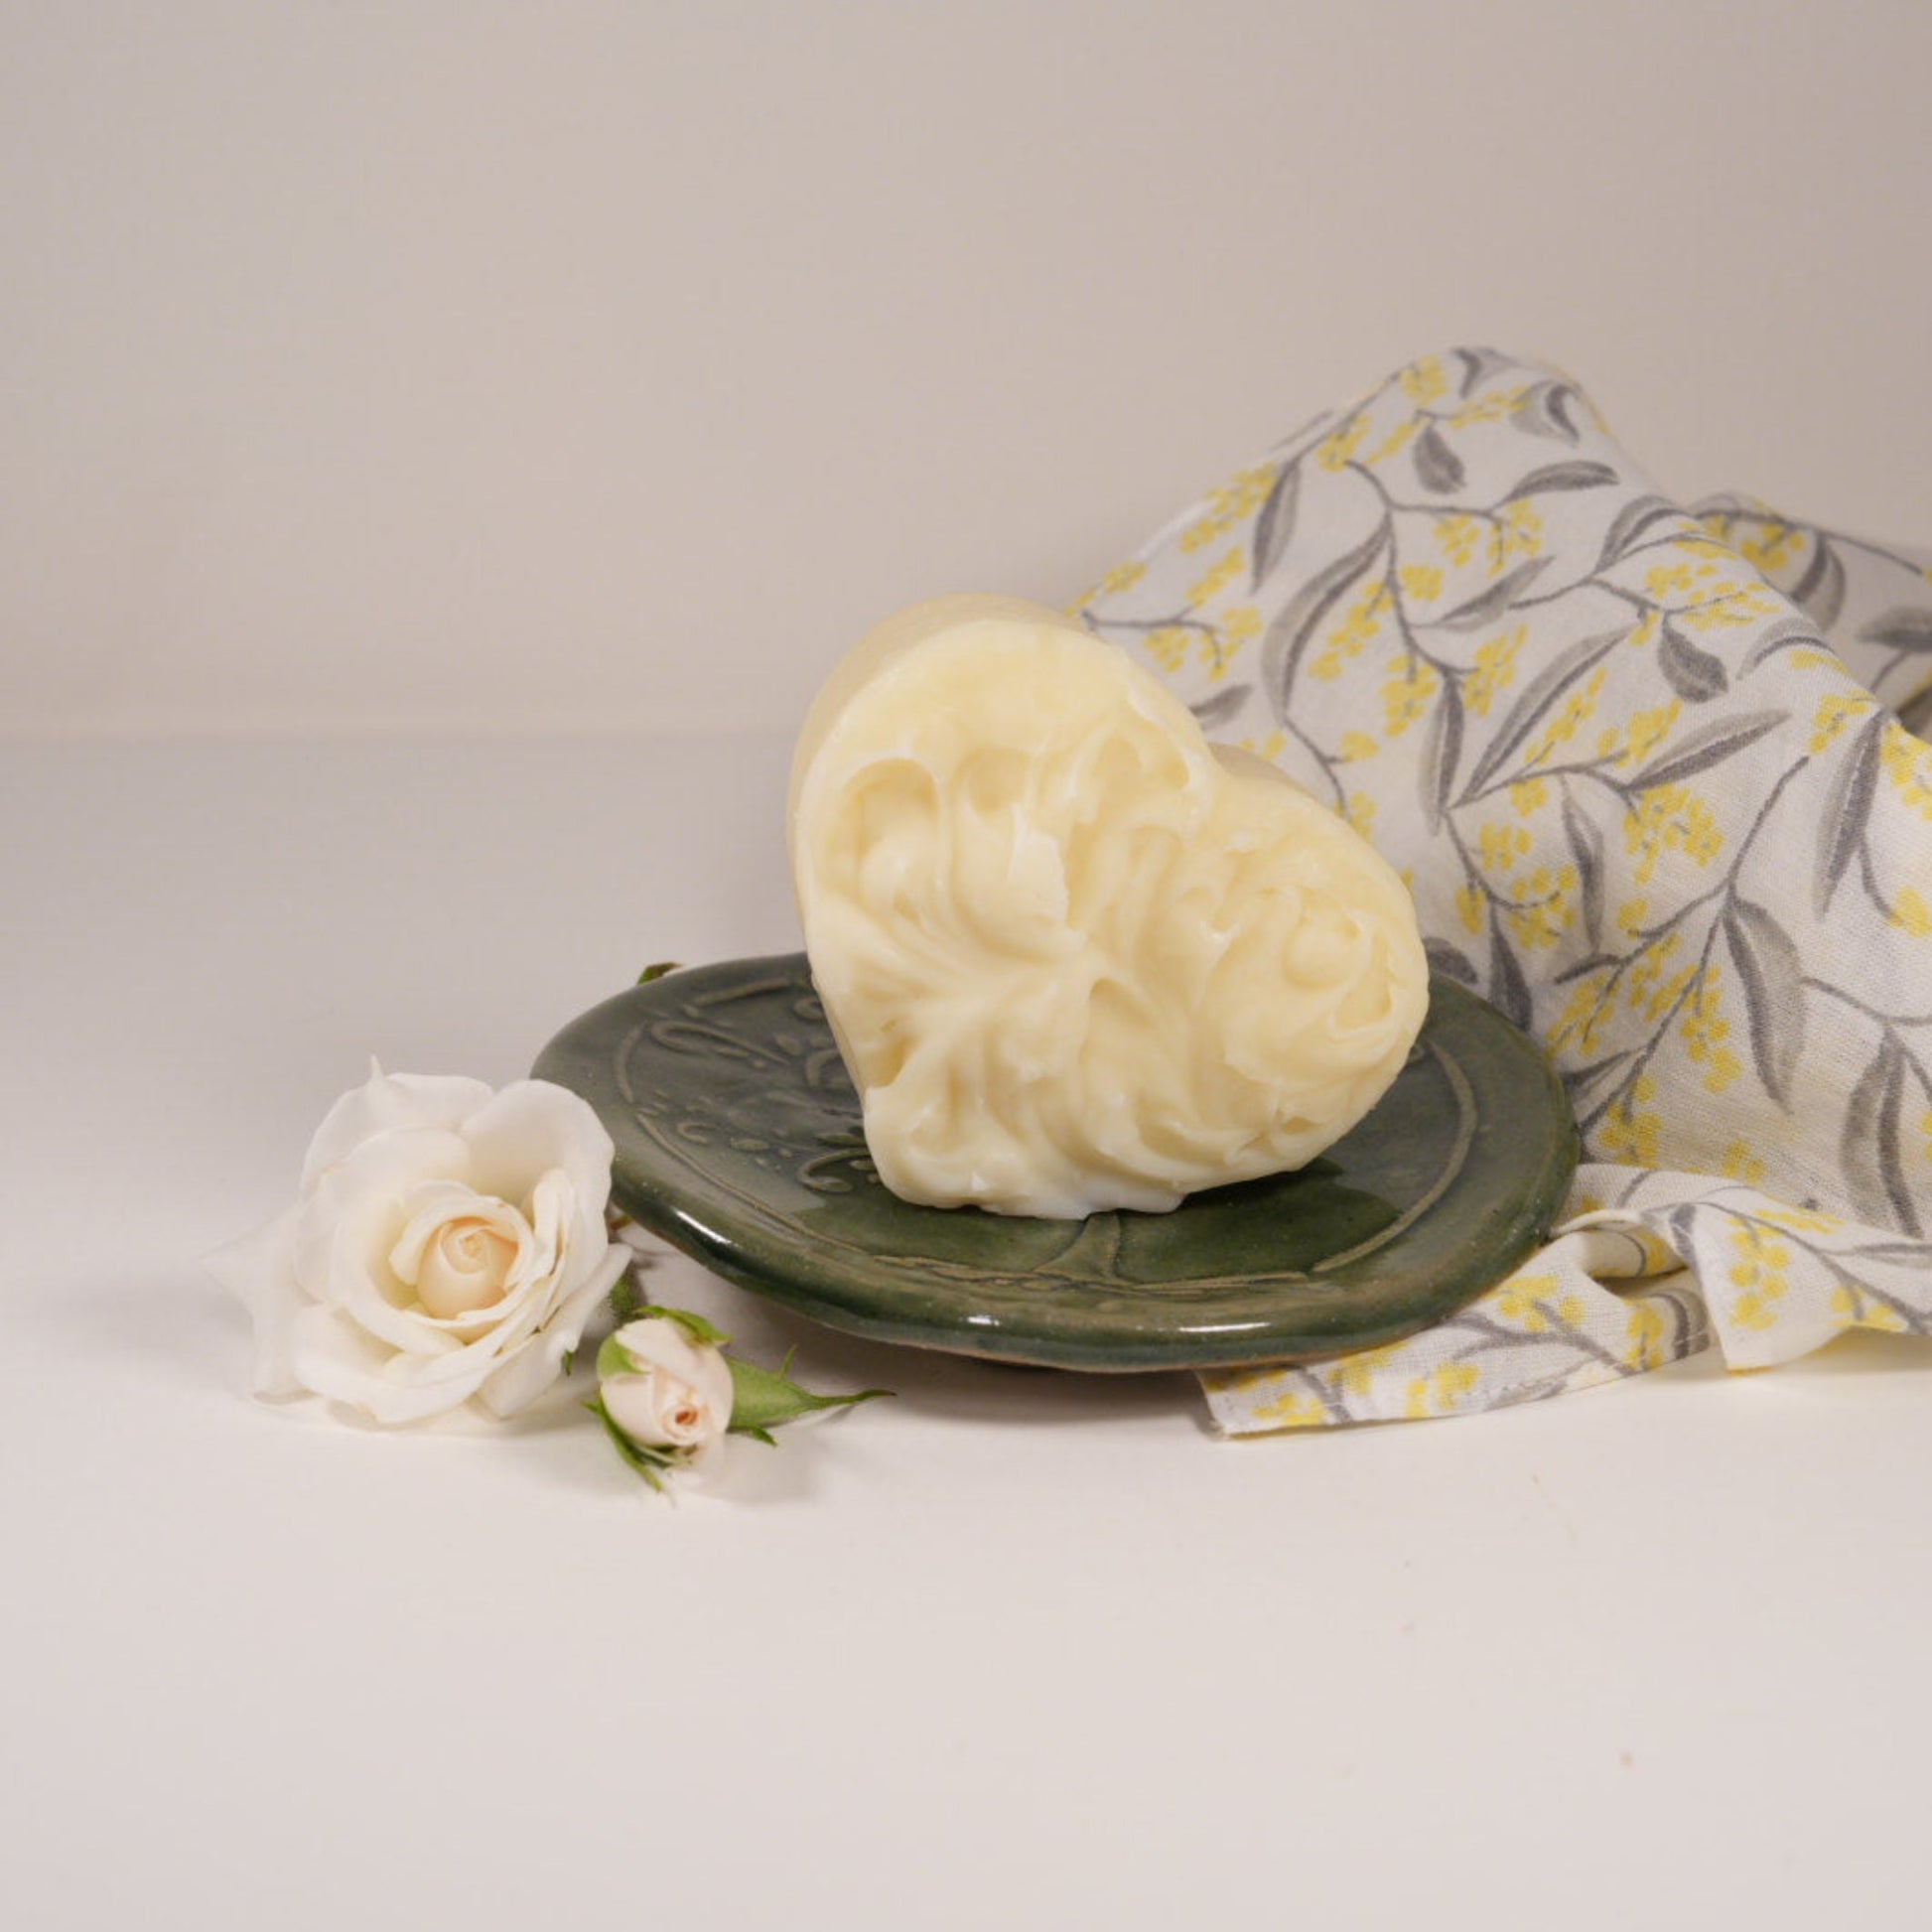 Eucalyptus Cleansing Soap Heart on round olive green soap dish with wattle face cloth